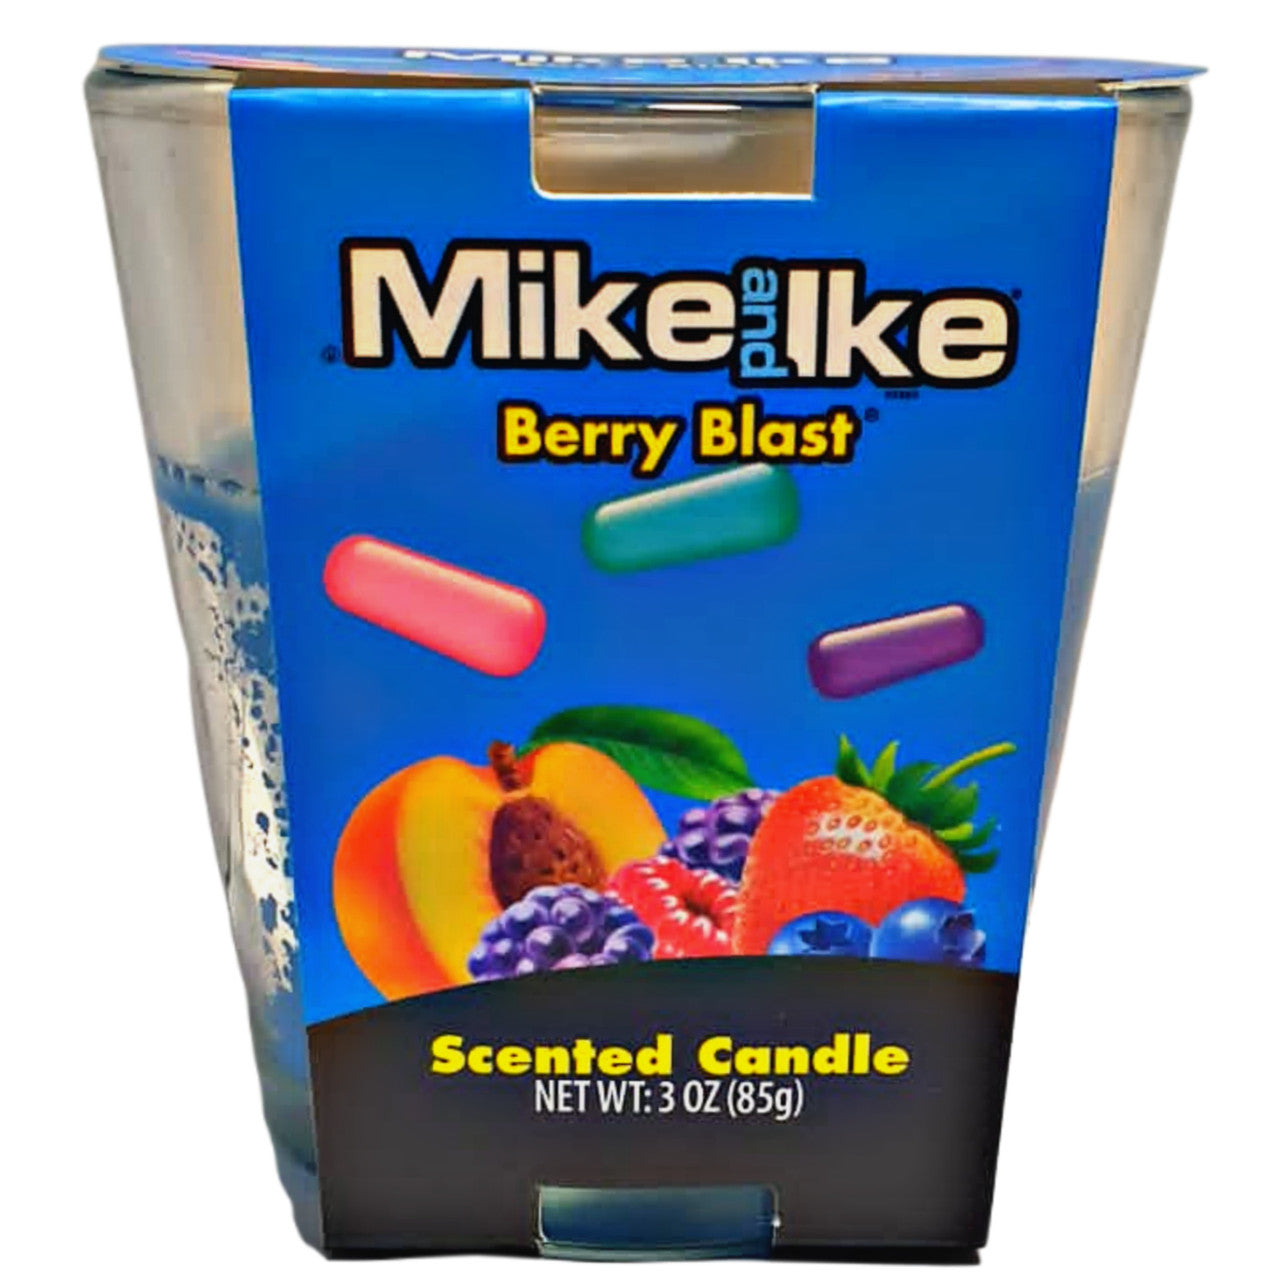 MIKE & LKE SCENTED CANDLES-3 OZ